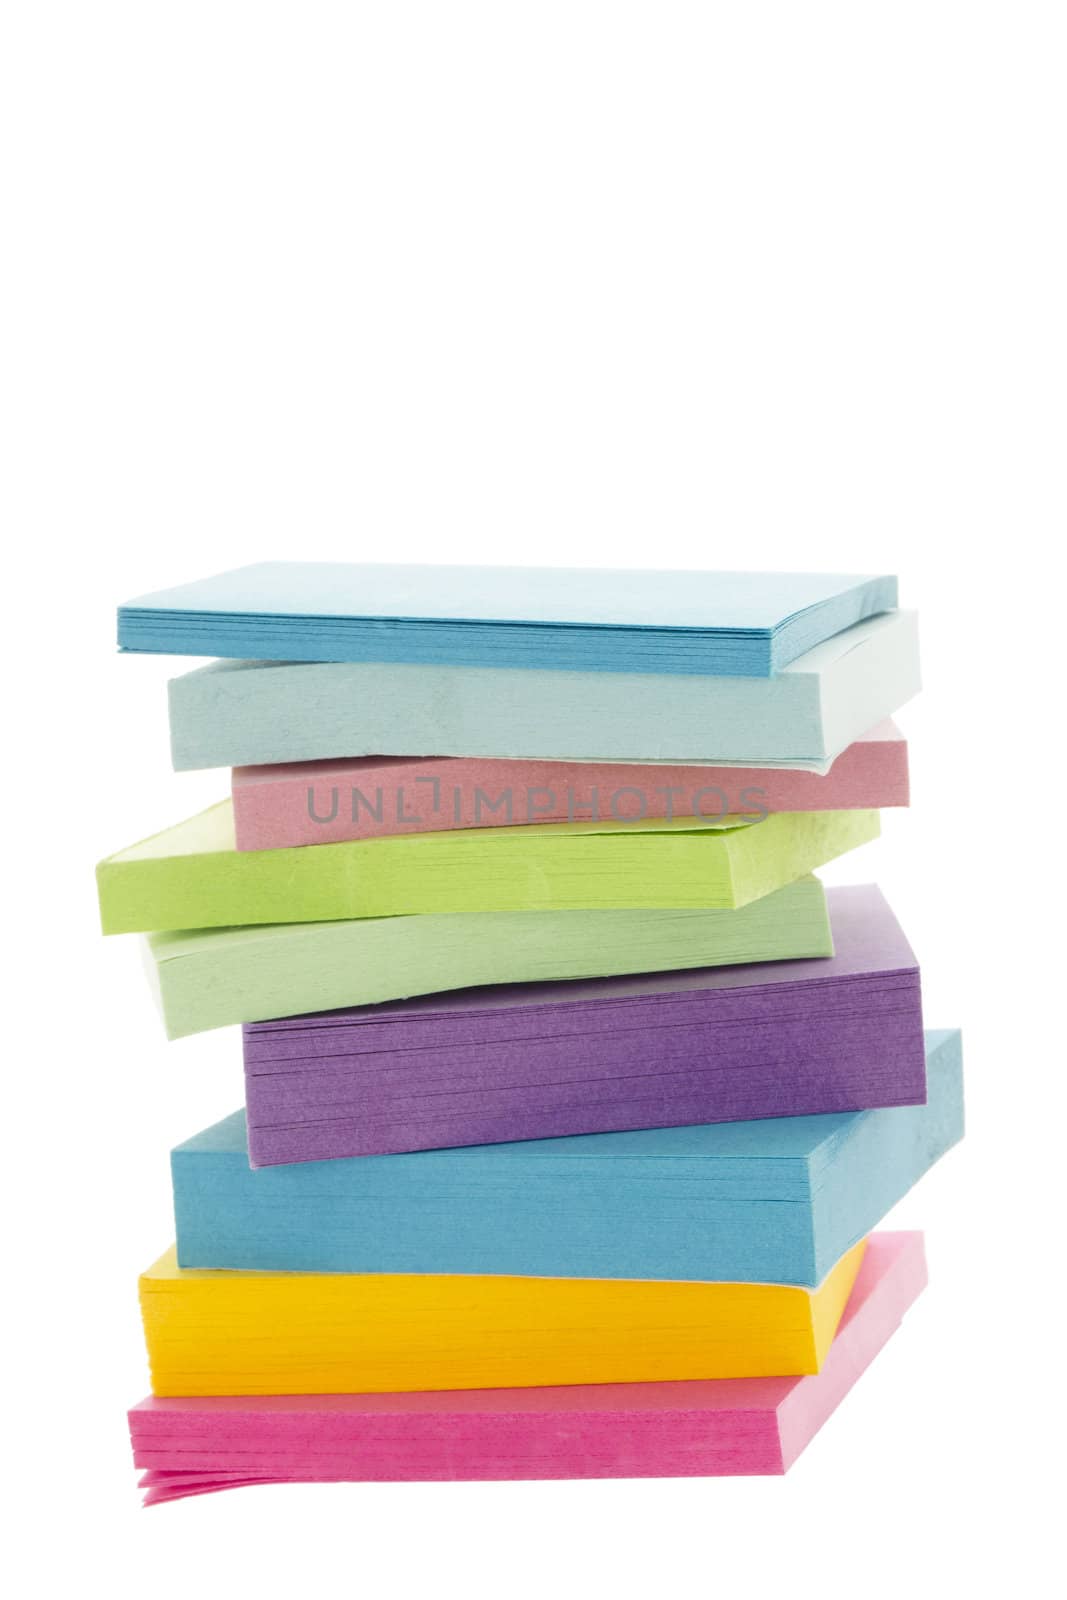 a pile of colorful adhesive paper by kozzi